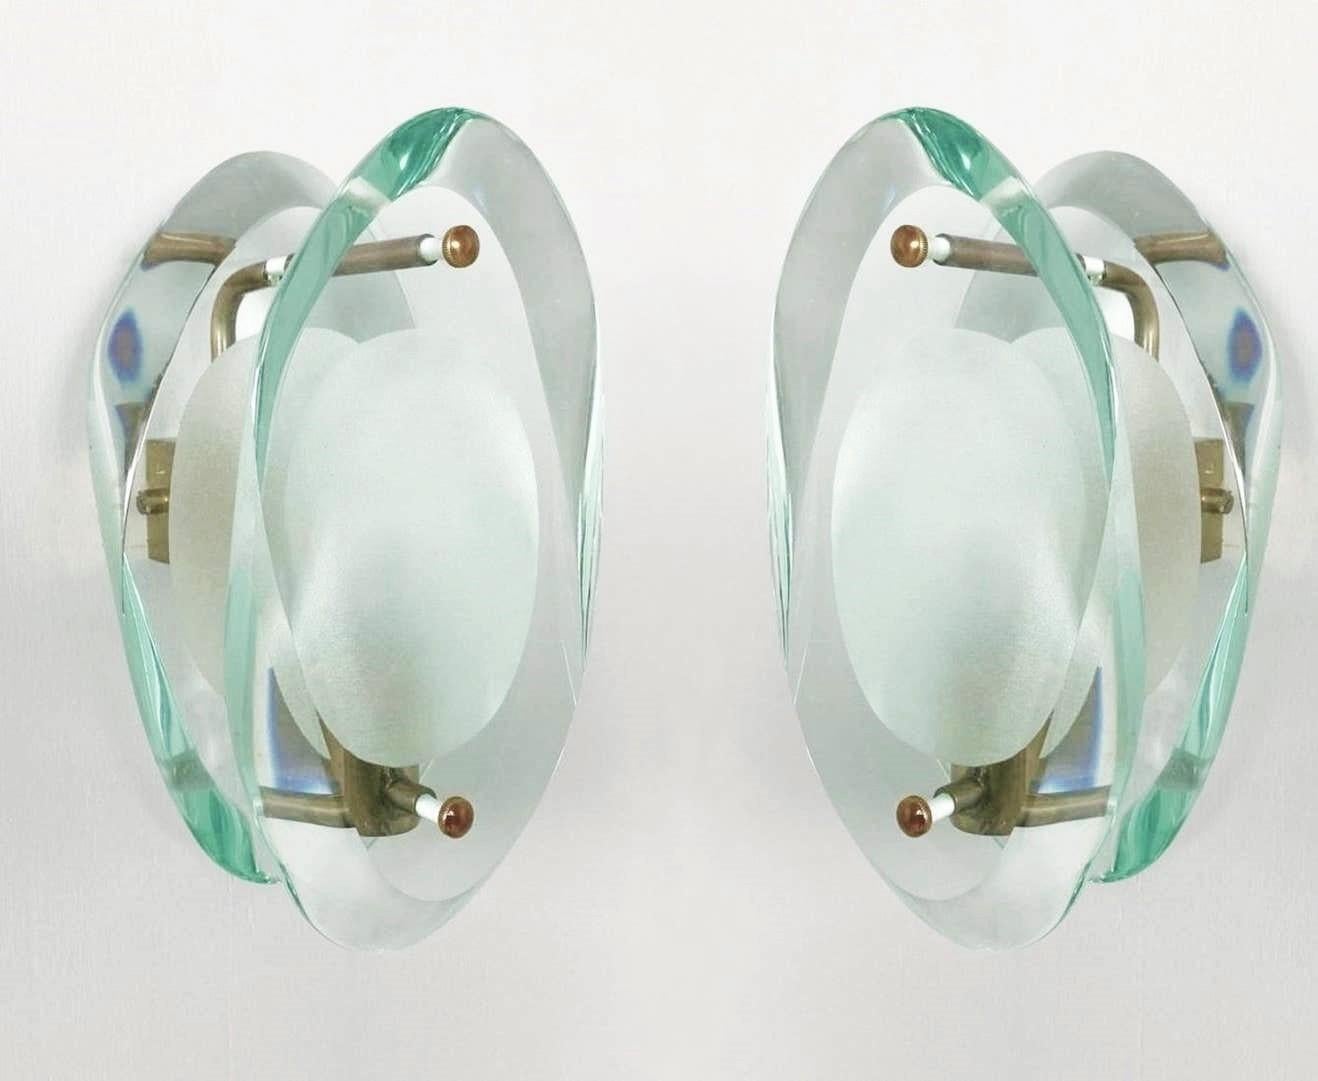 Mid-Century Modern Pair of Wall Sconces by Max Ingrand for Fontana Arte Model 2093, Italy, 1961